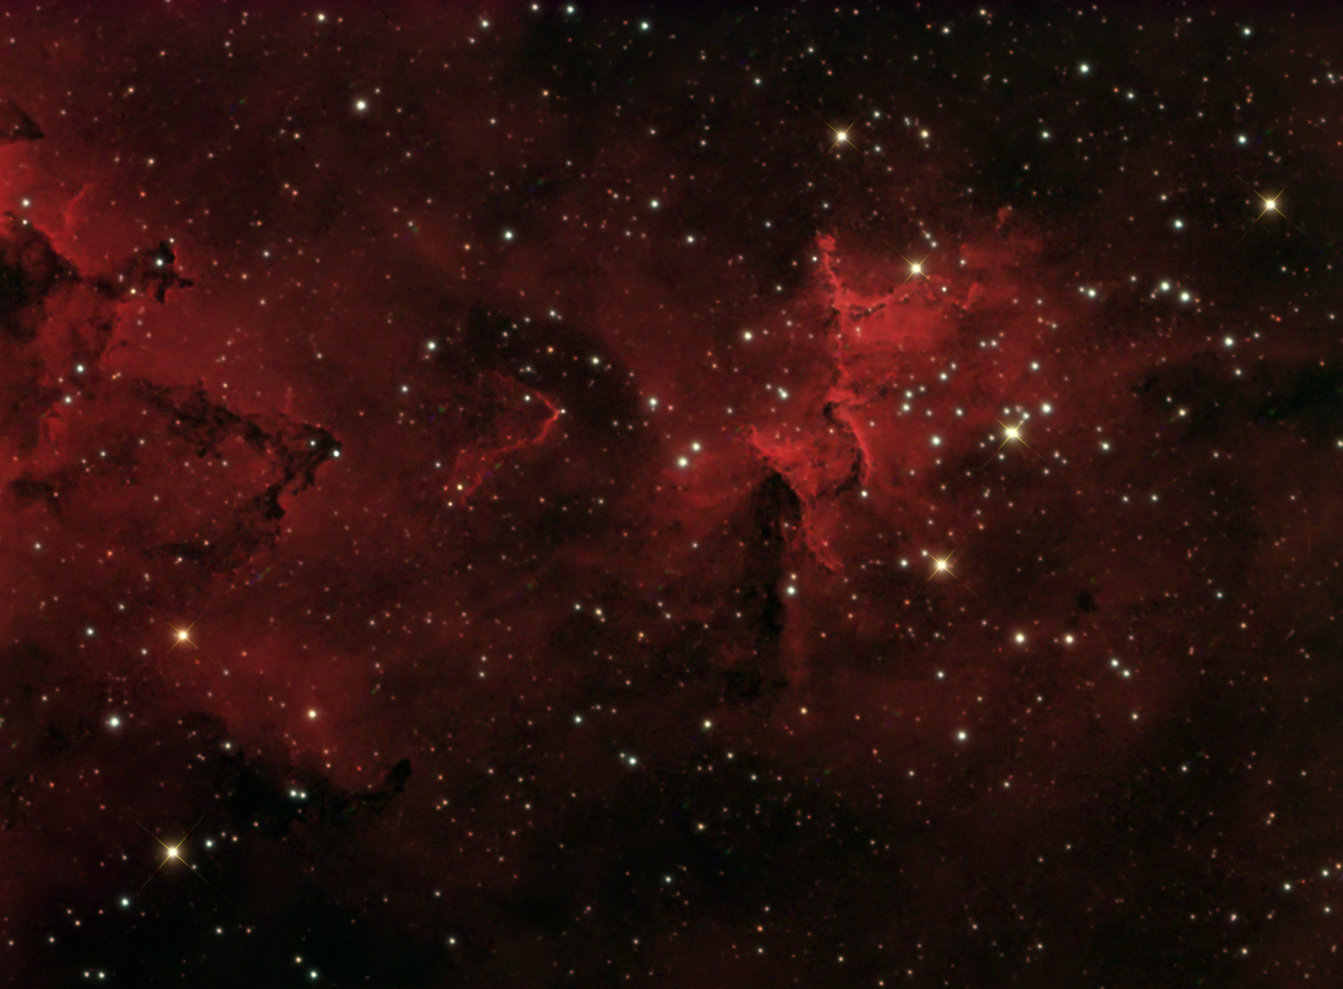 Melotte 15 - Center Of Heart Nebula In Hargb